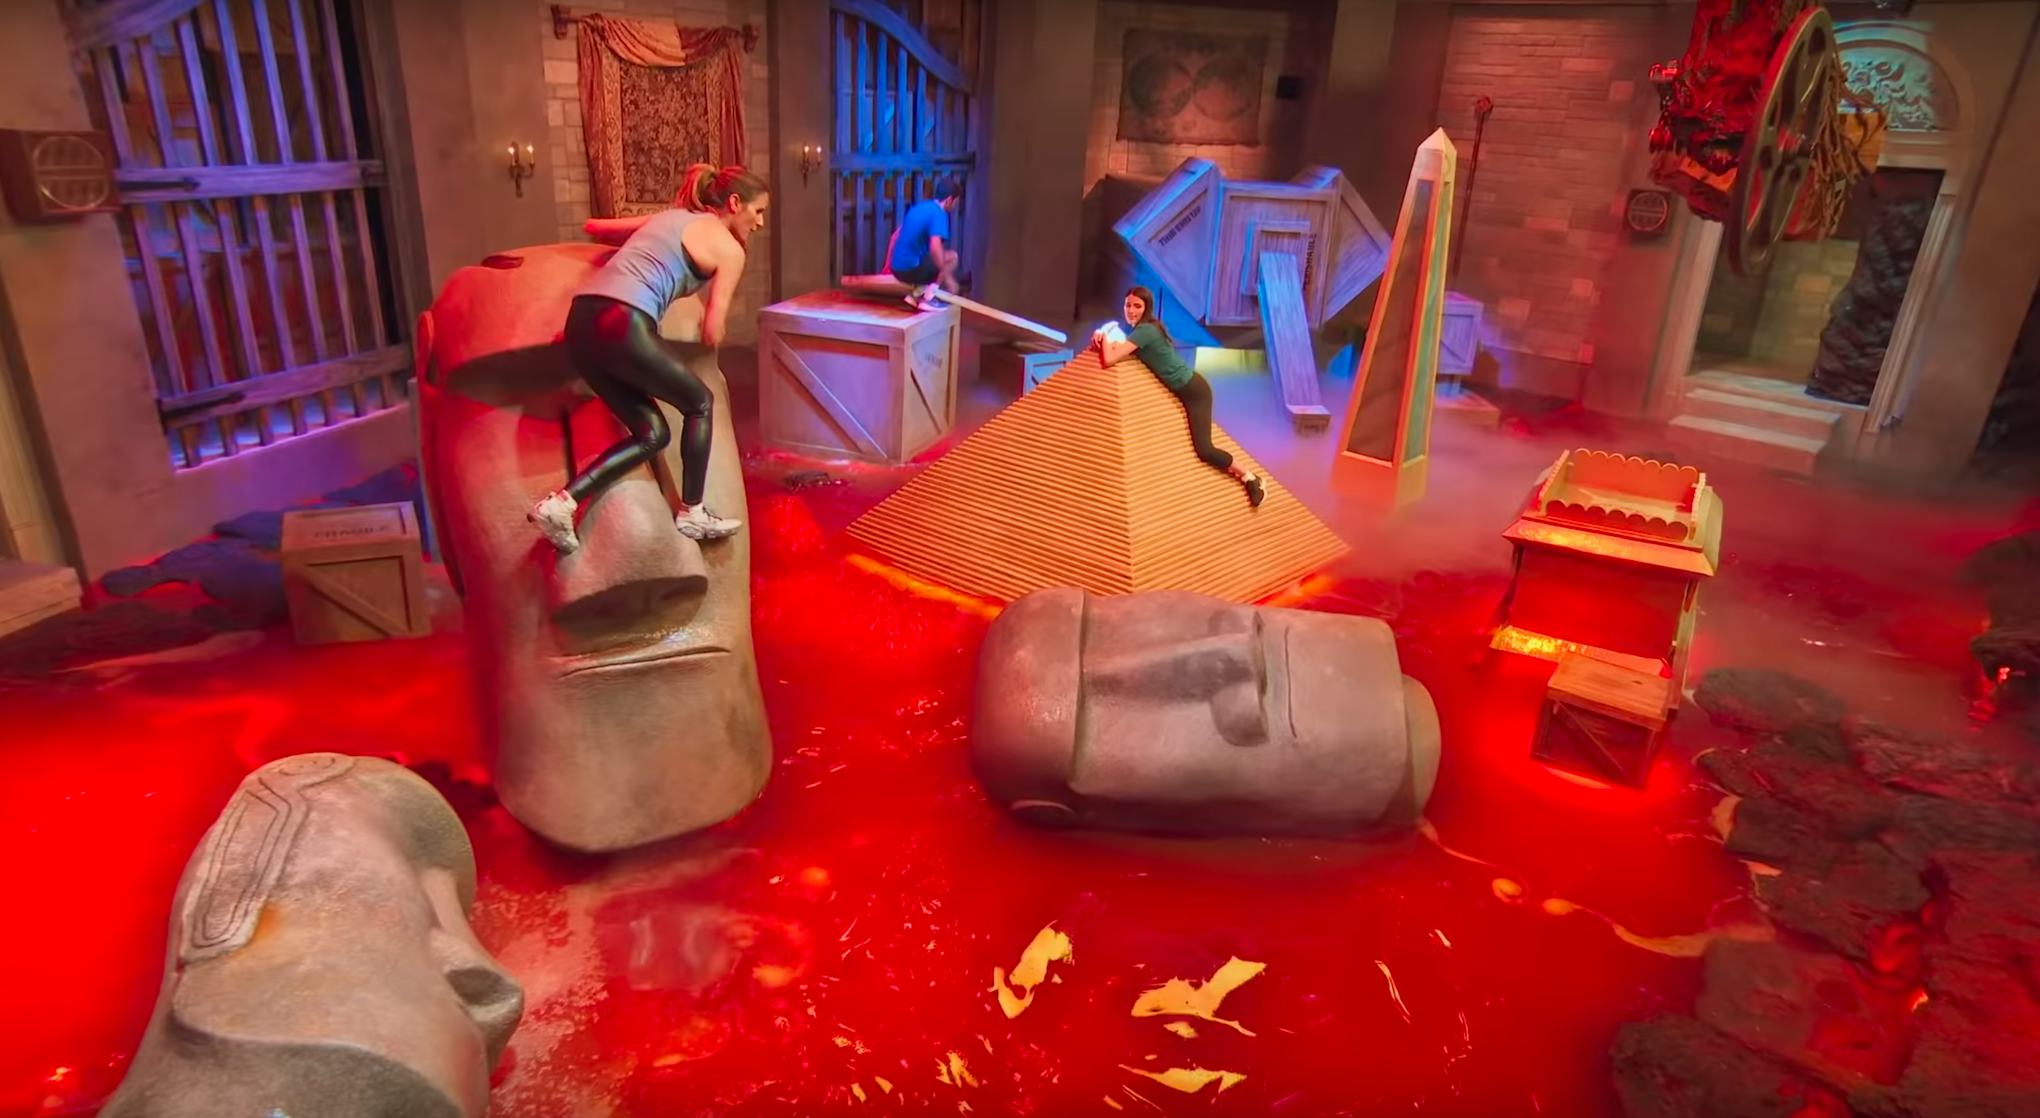 13 BehindTheScenes Facts About 'Floor Is Lava' That'll Leave You Shook